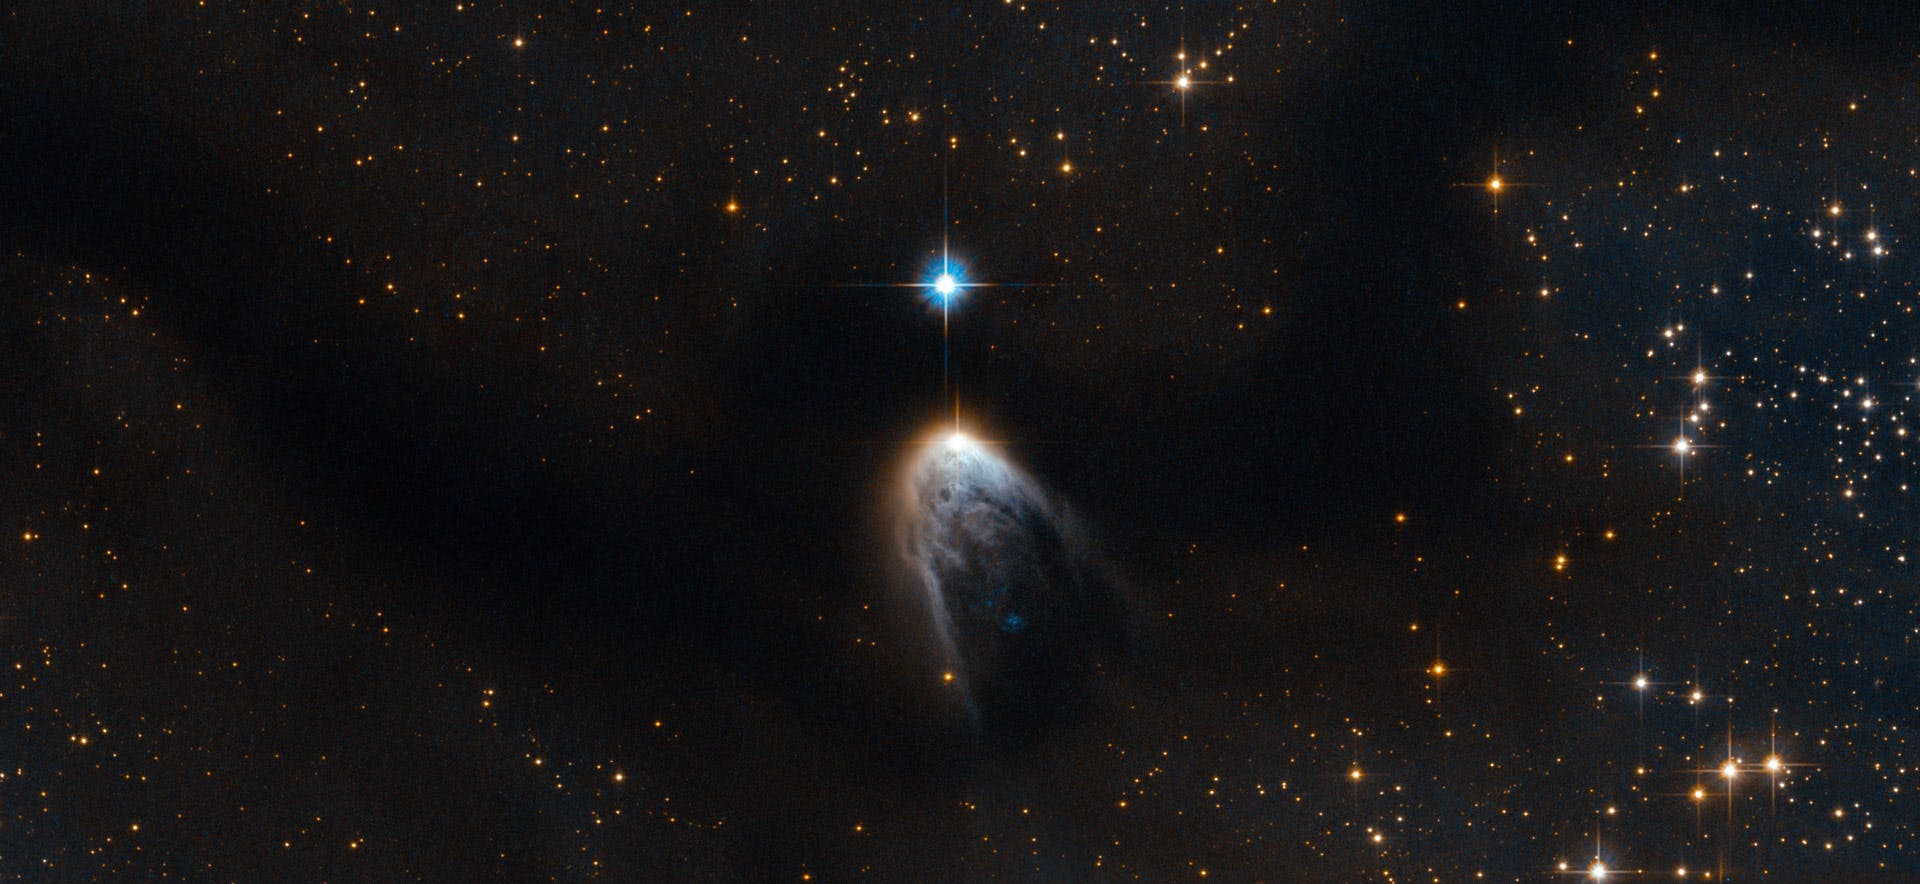 New Hubble Image Shows IRAS 14568-6304